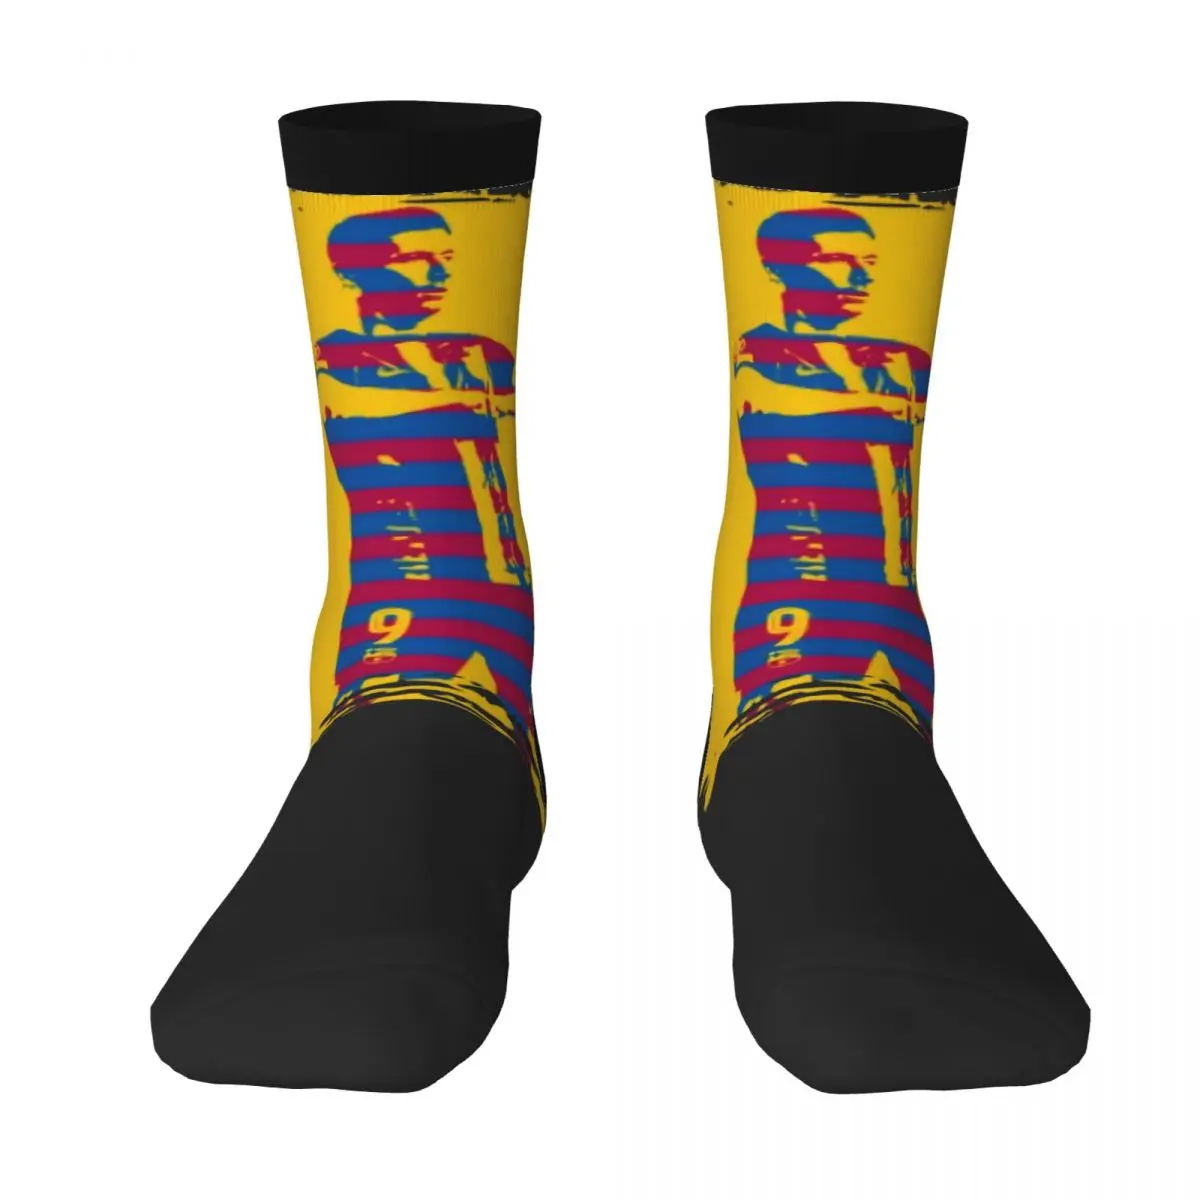 

Poland Robertss And Lewandowss 8 Football Team Stocking Unique BEST TO BUY Contrast color Field pack Humor Graphic Elastic Socks